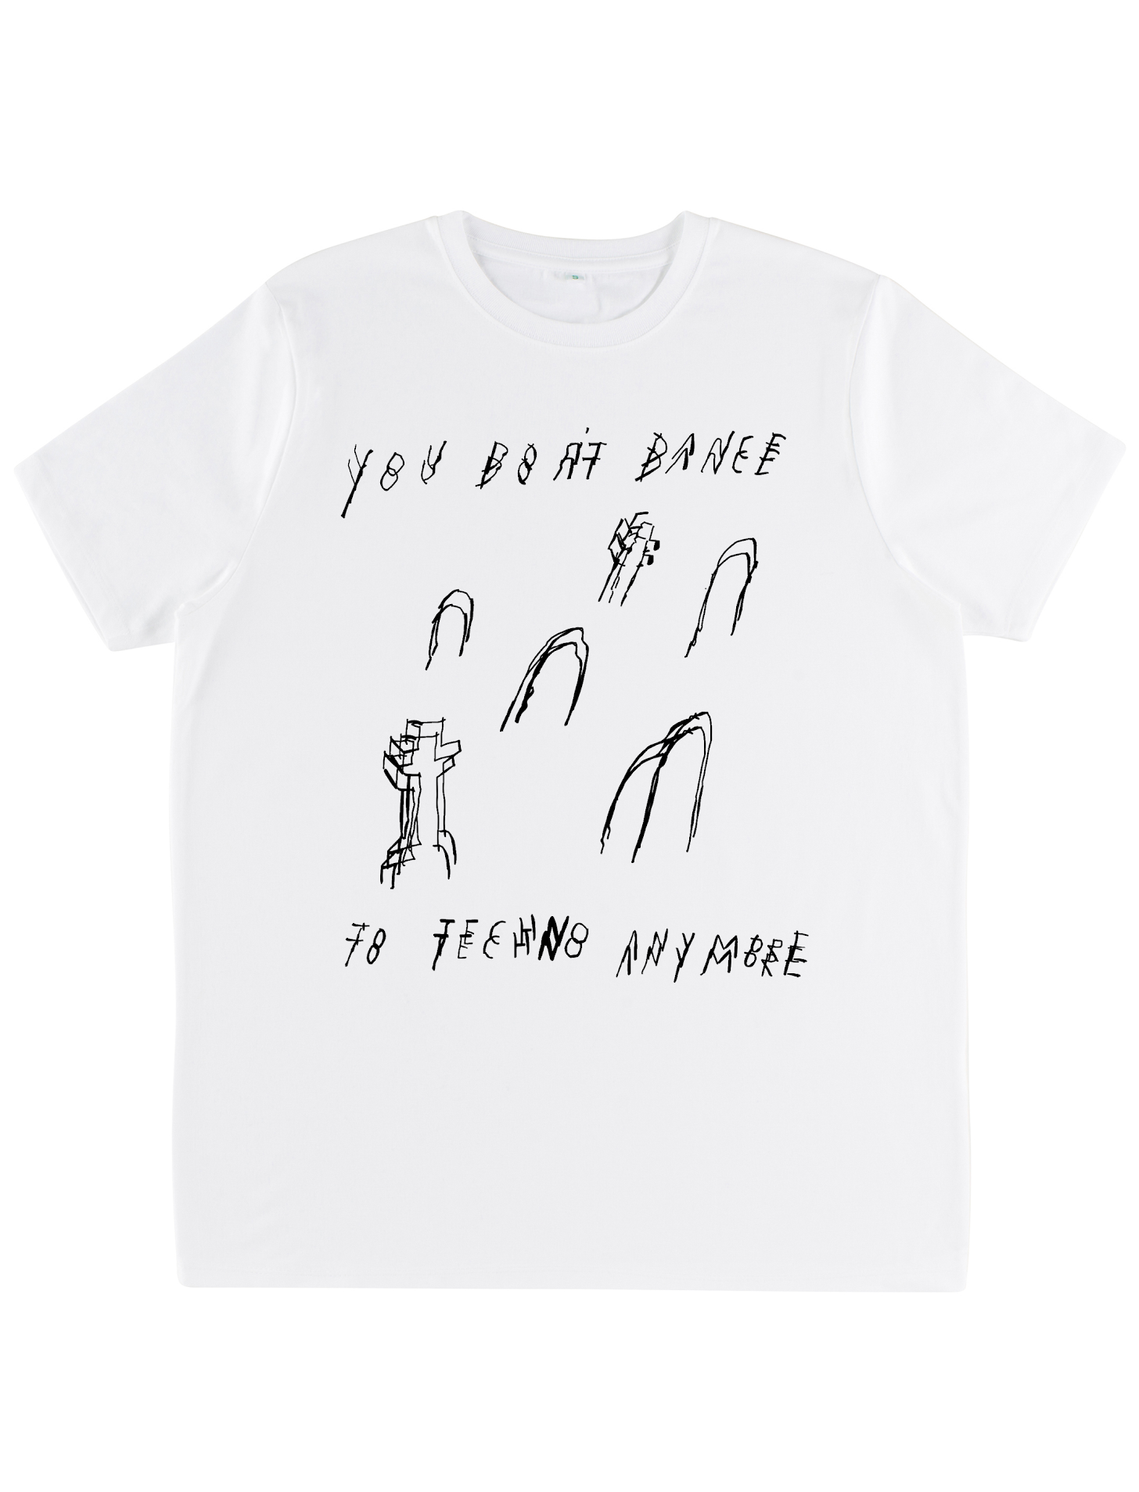 White screen printed T shirt , Design made by artist Mary Naylor. Raising money for The Ben Raemers Foundation. To help support suicide awareness. 
It reads ‘ You don’t dance to Tecno anymore’ and features a graveyard.